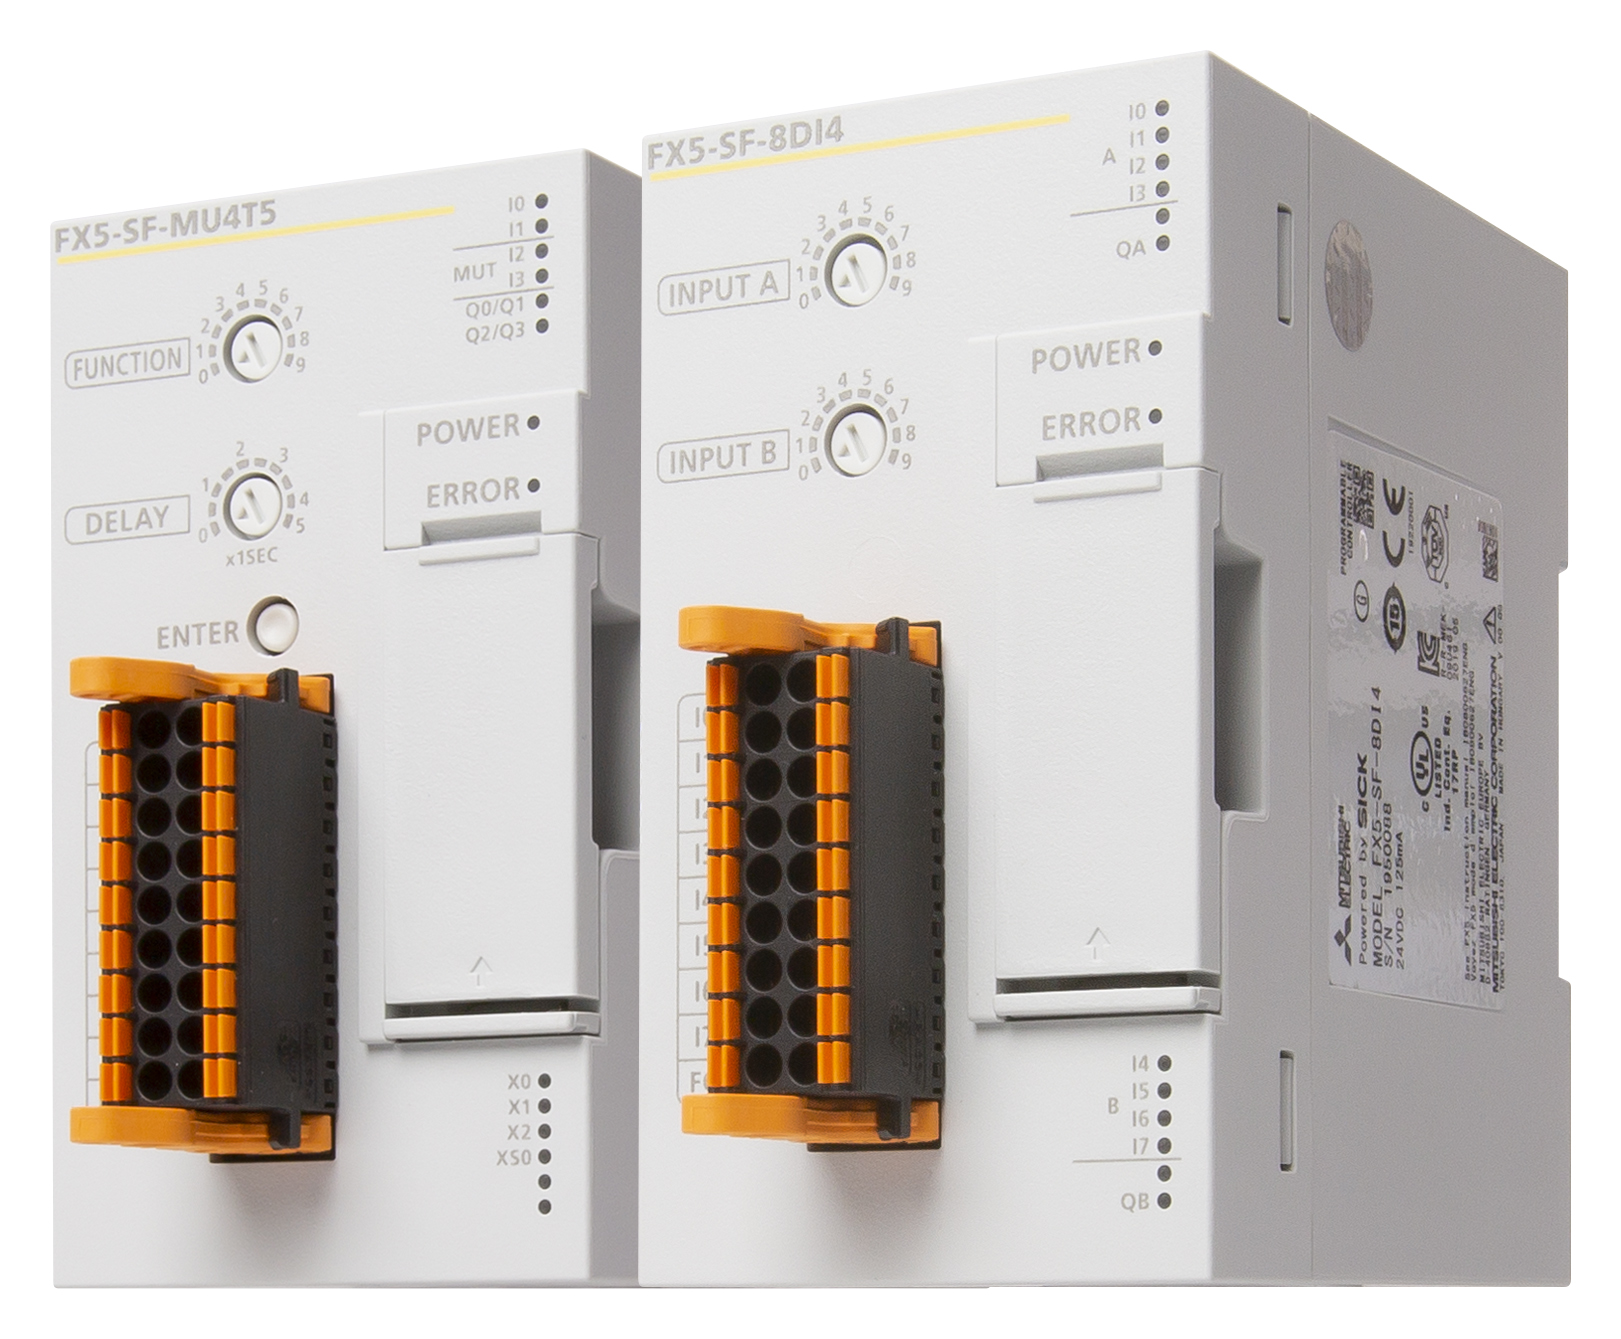 The newly launched FX5-SF-MU4T5 main module and FX5-SF-8DIA input expansion module facilitate the introduction of smart safety operations on the factory floor. [Source: Mitsubishi Electric Europe B.V.]